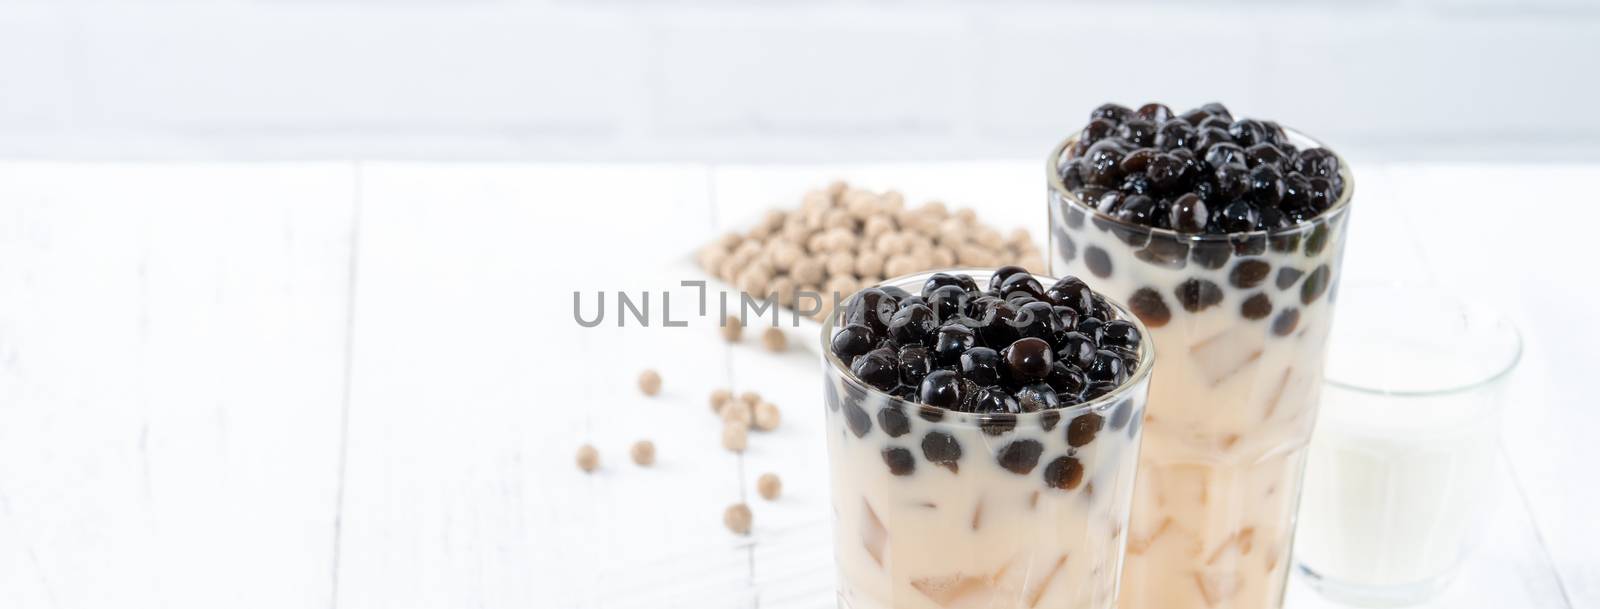 Bubble milk tea with tapioca pearl topping, famous Taiwanese drink on white wooden table background in drinking glass, close up, copy space